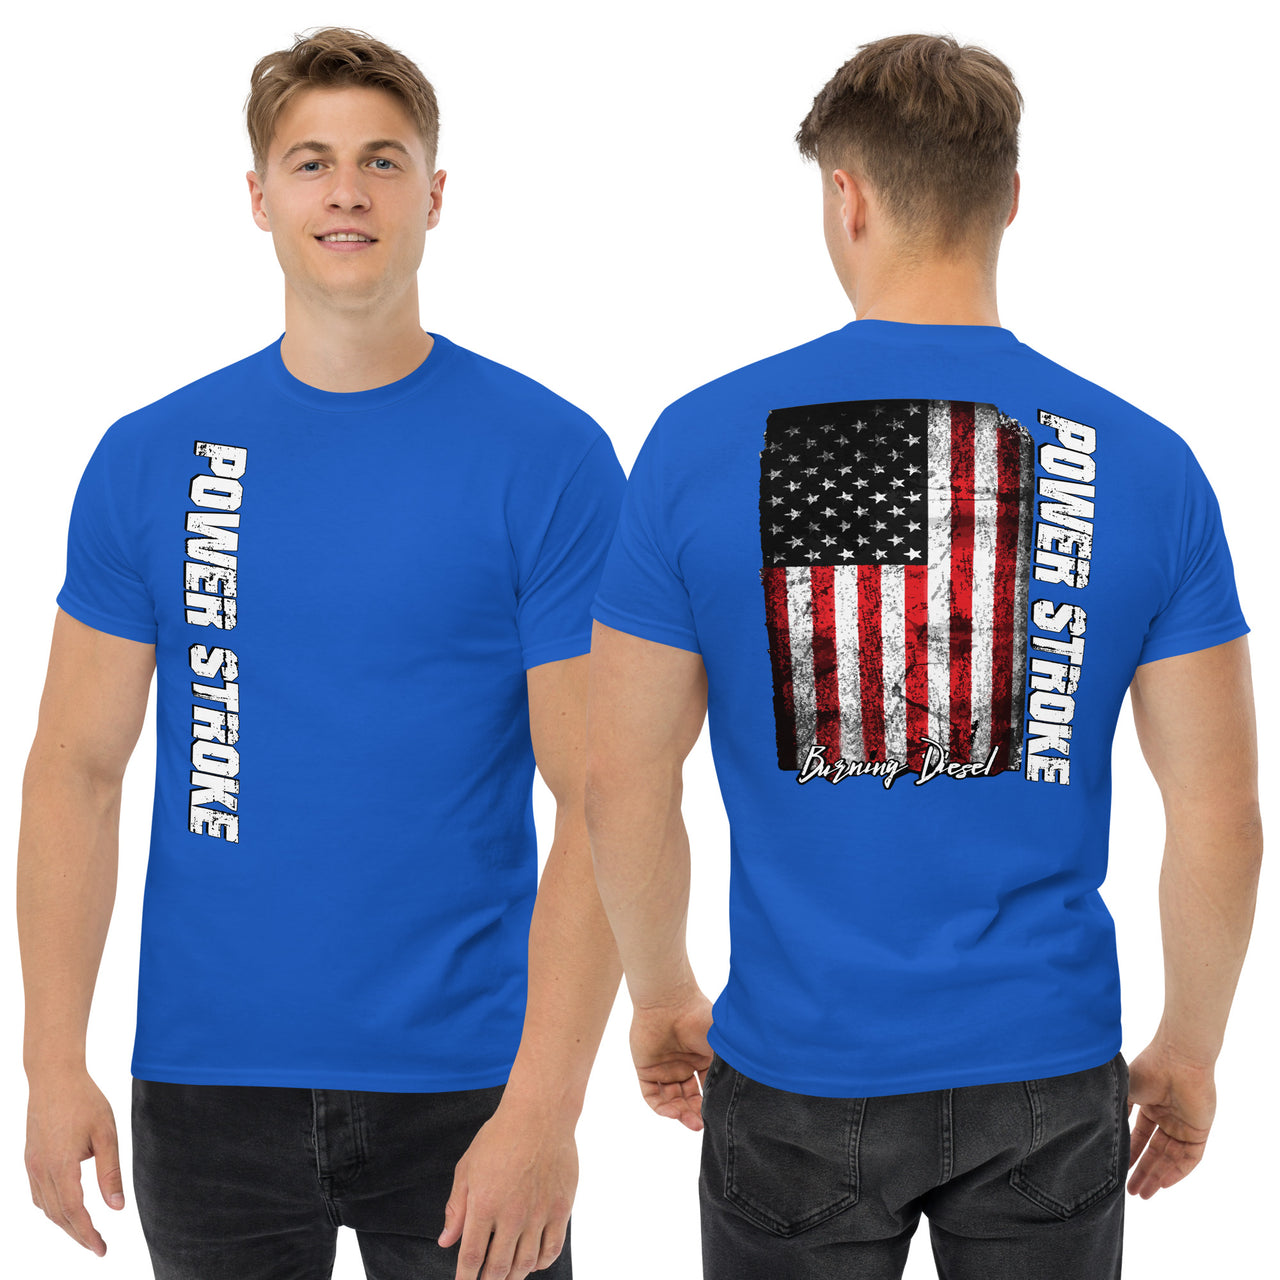 Power Stroke Diesel Shirt American Flag T-Shirt modeled in blue from Aggressive Thread